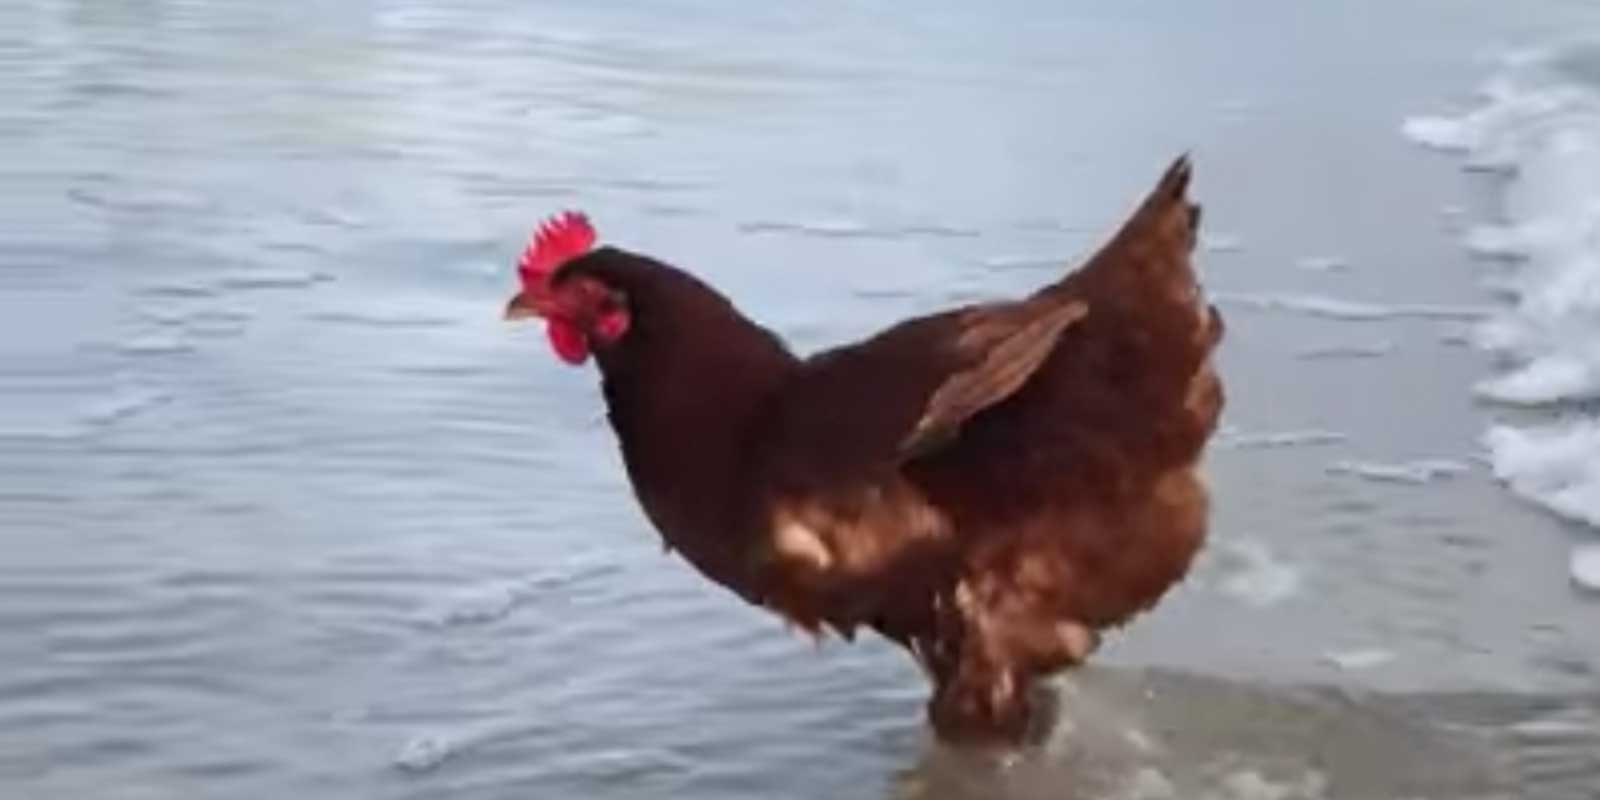 Why Did They Chicken Cross the Road?...To Go For A Bodysurf In Florida